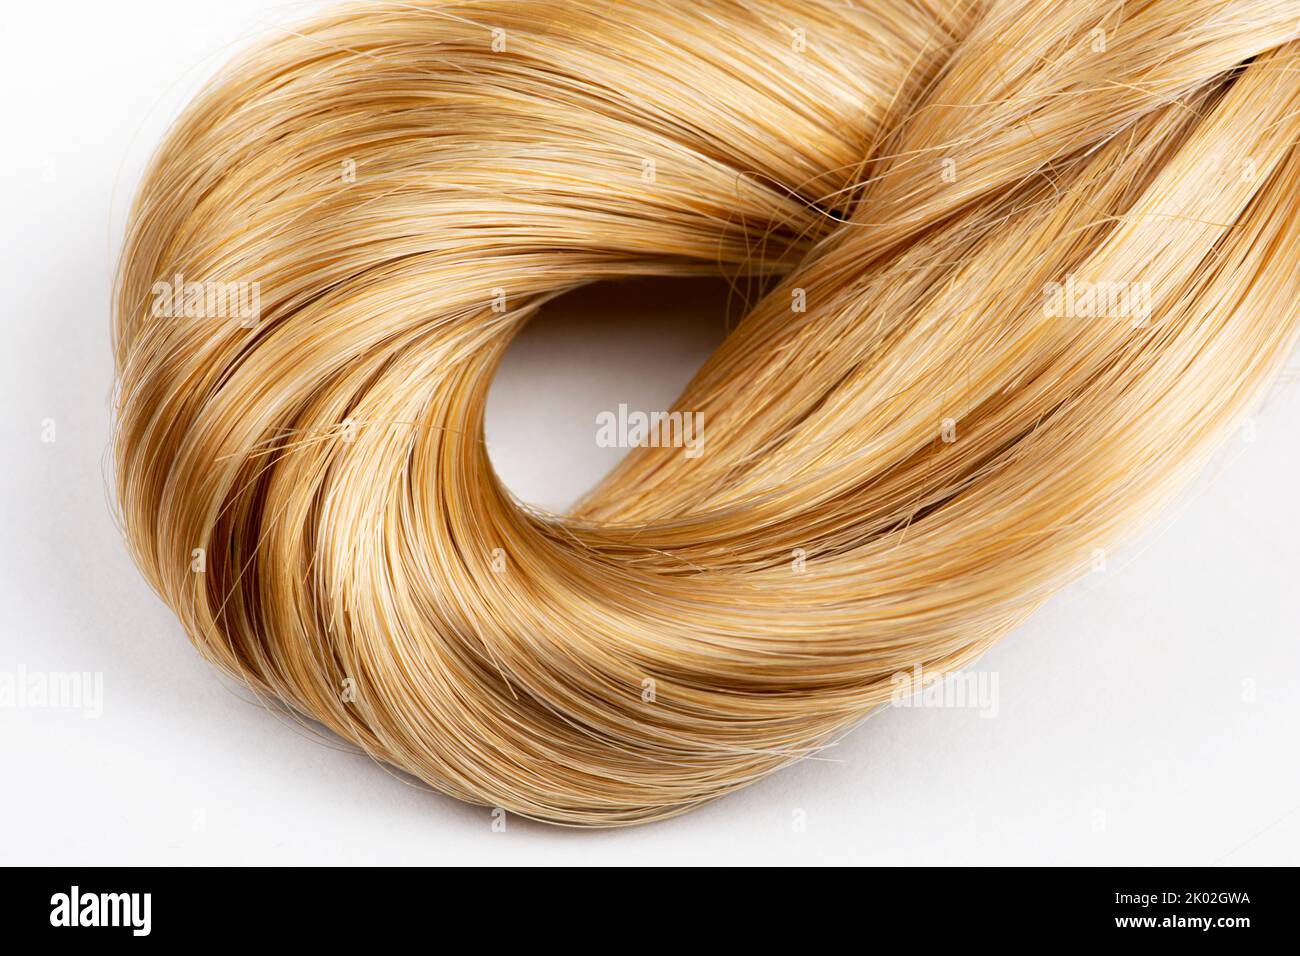 Blonde hair tied in knot on white background Stock Photo